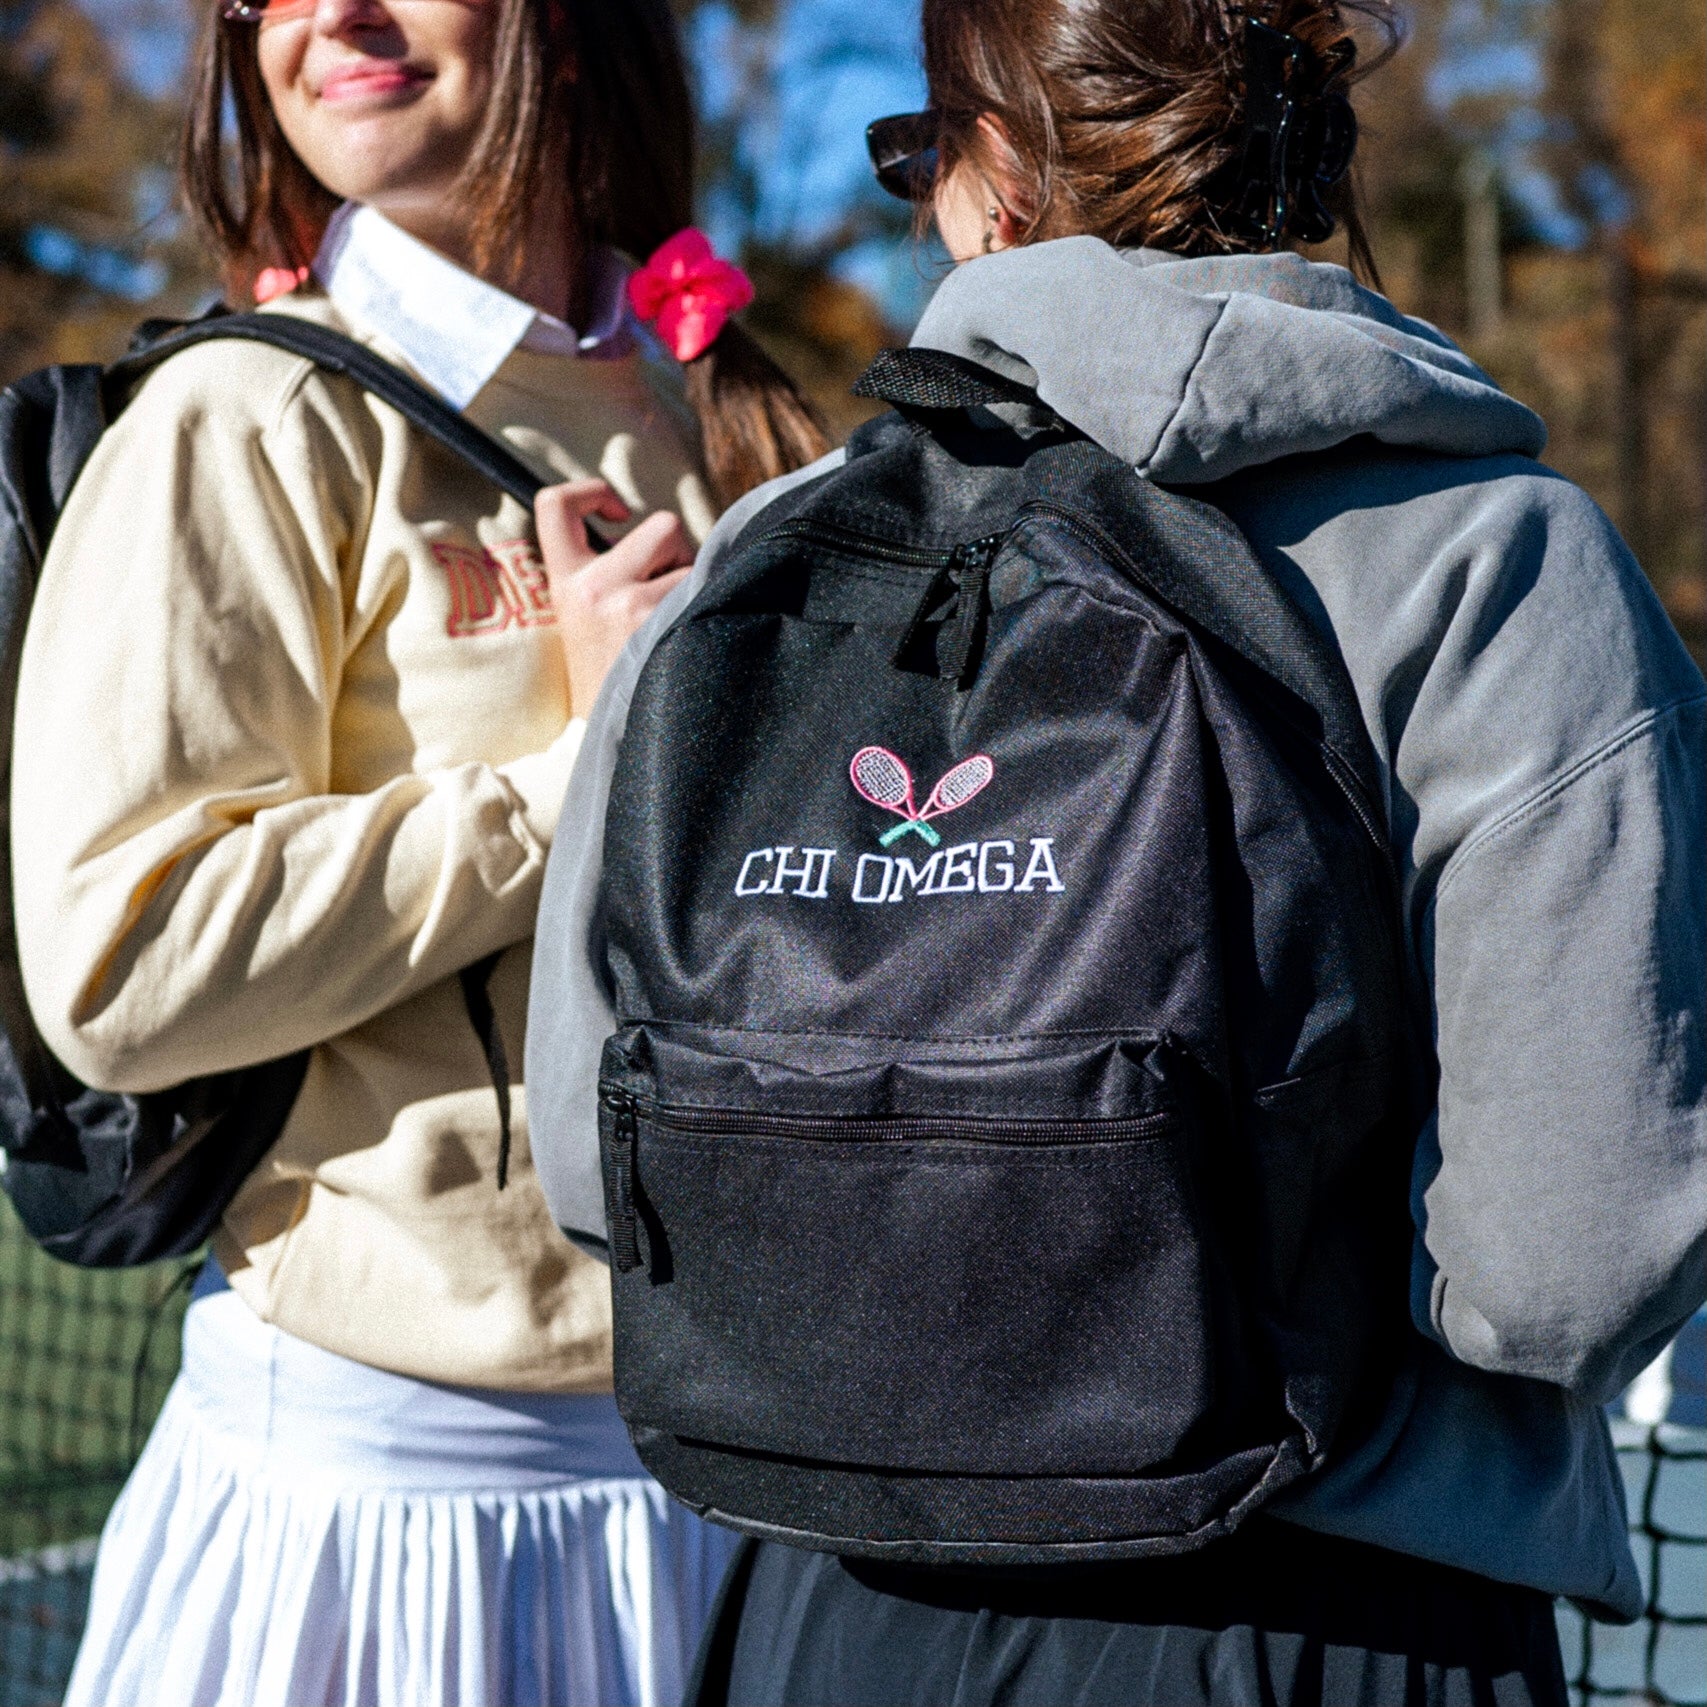 Tennis Academy Embroidered Backpack